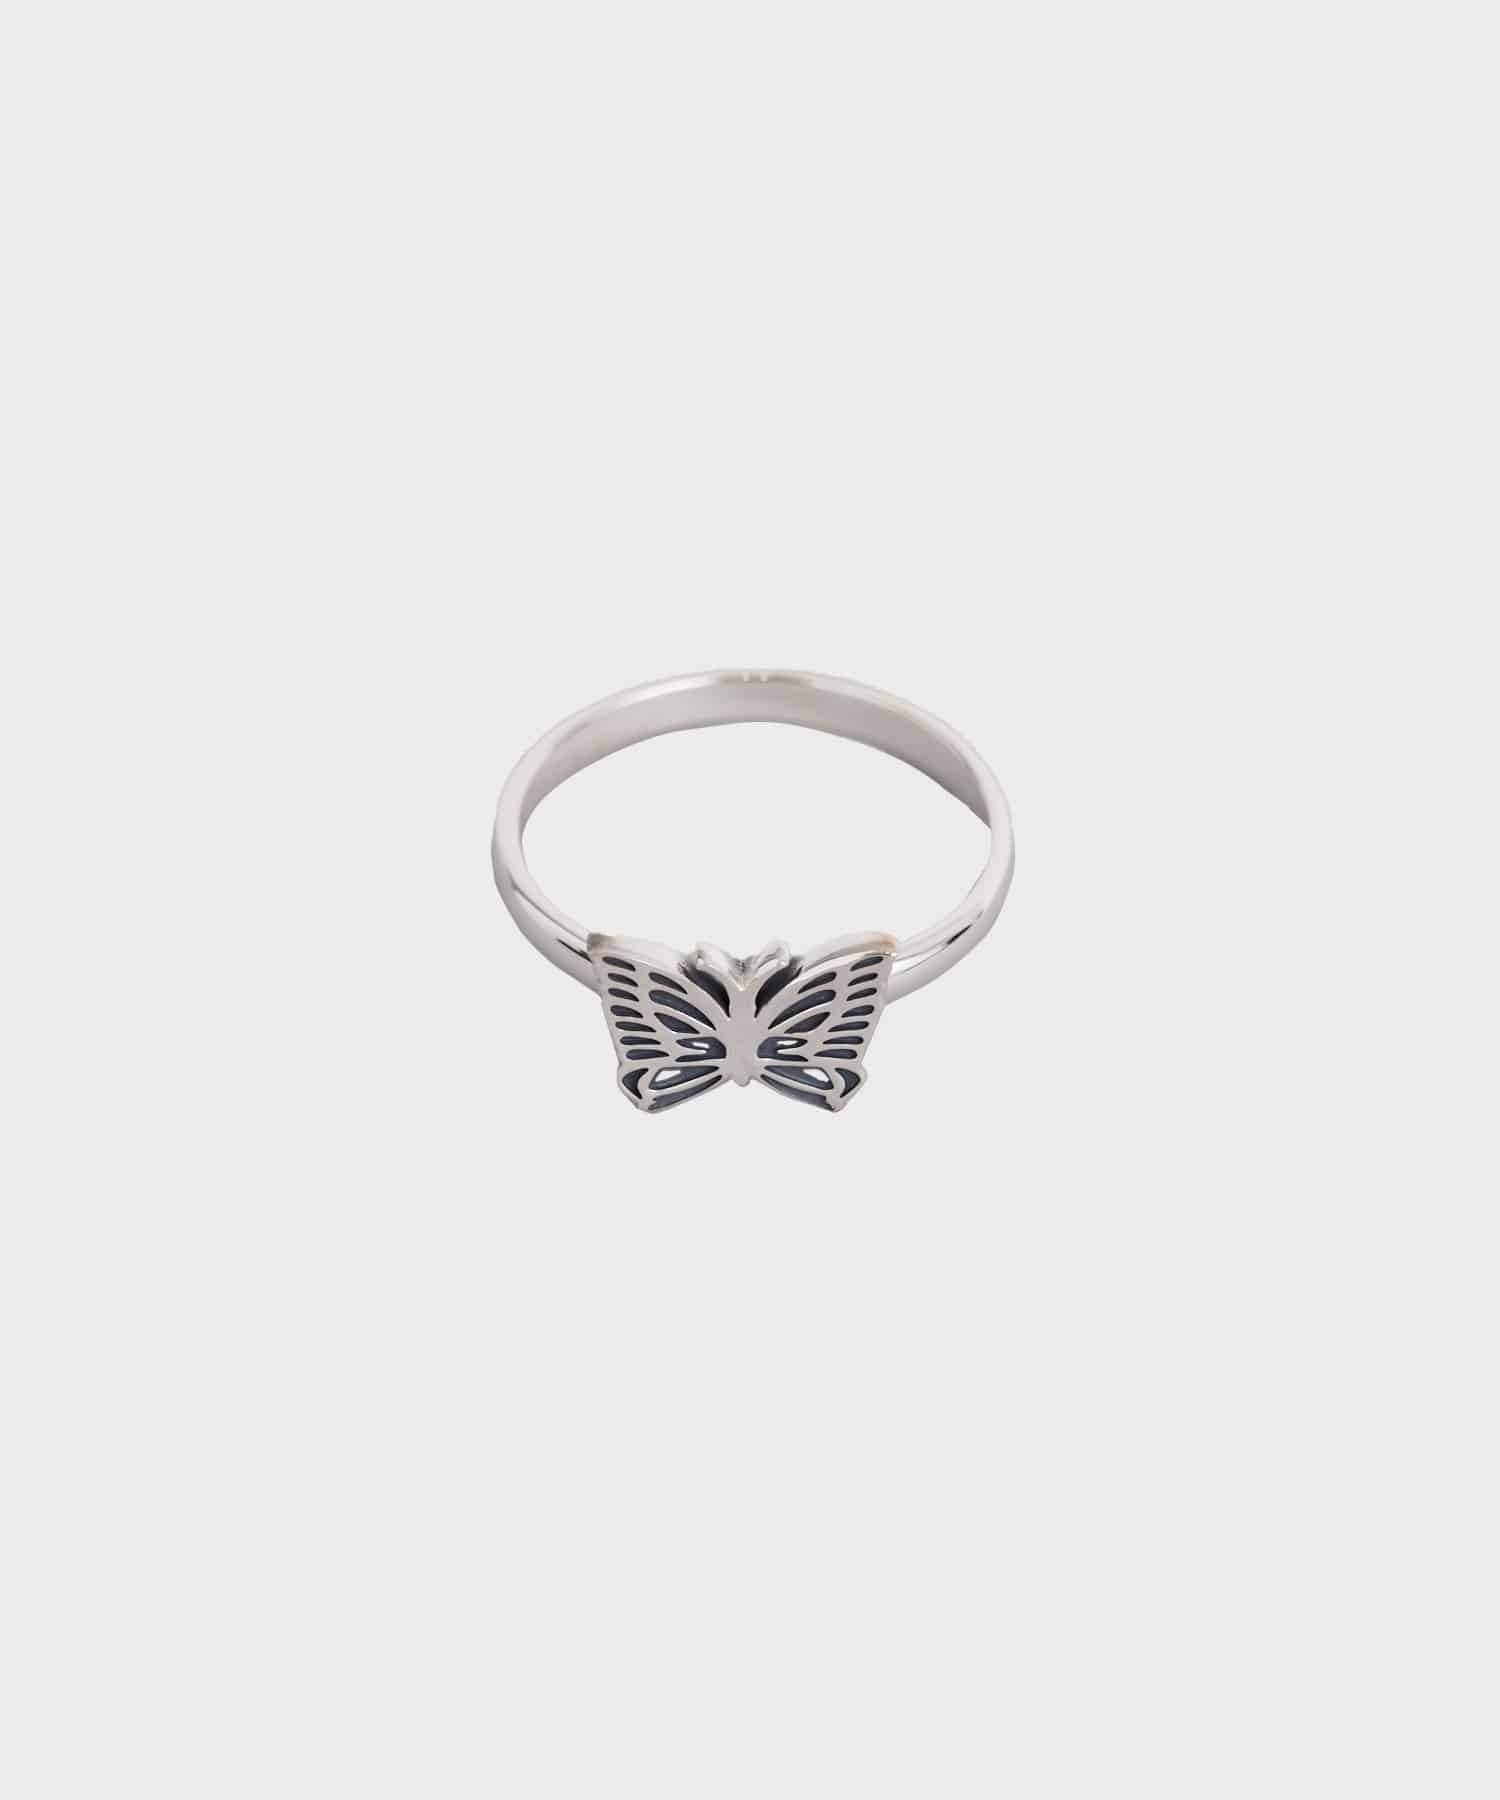 Ring - 925 Silver